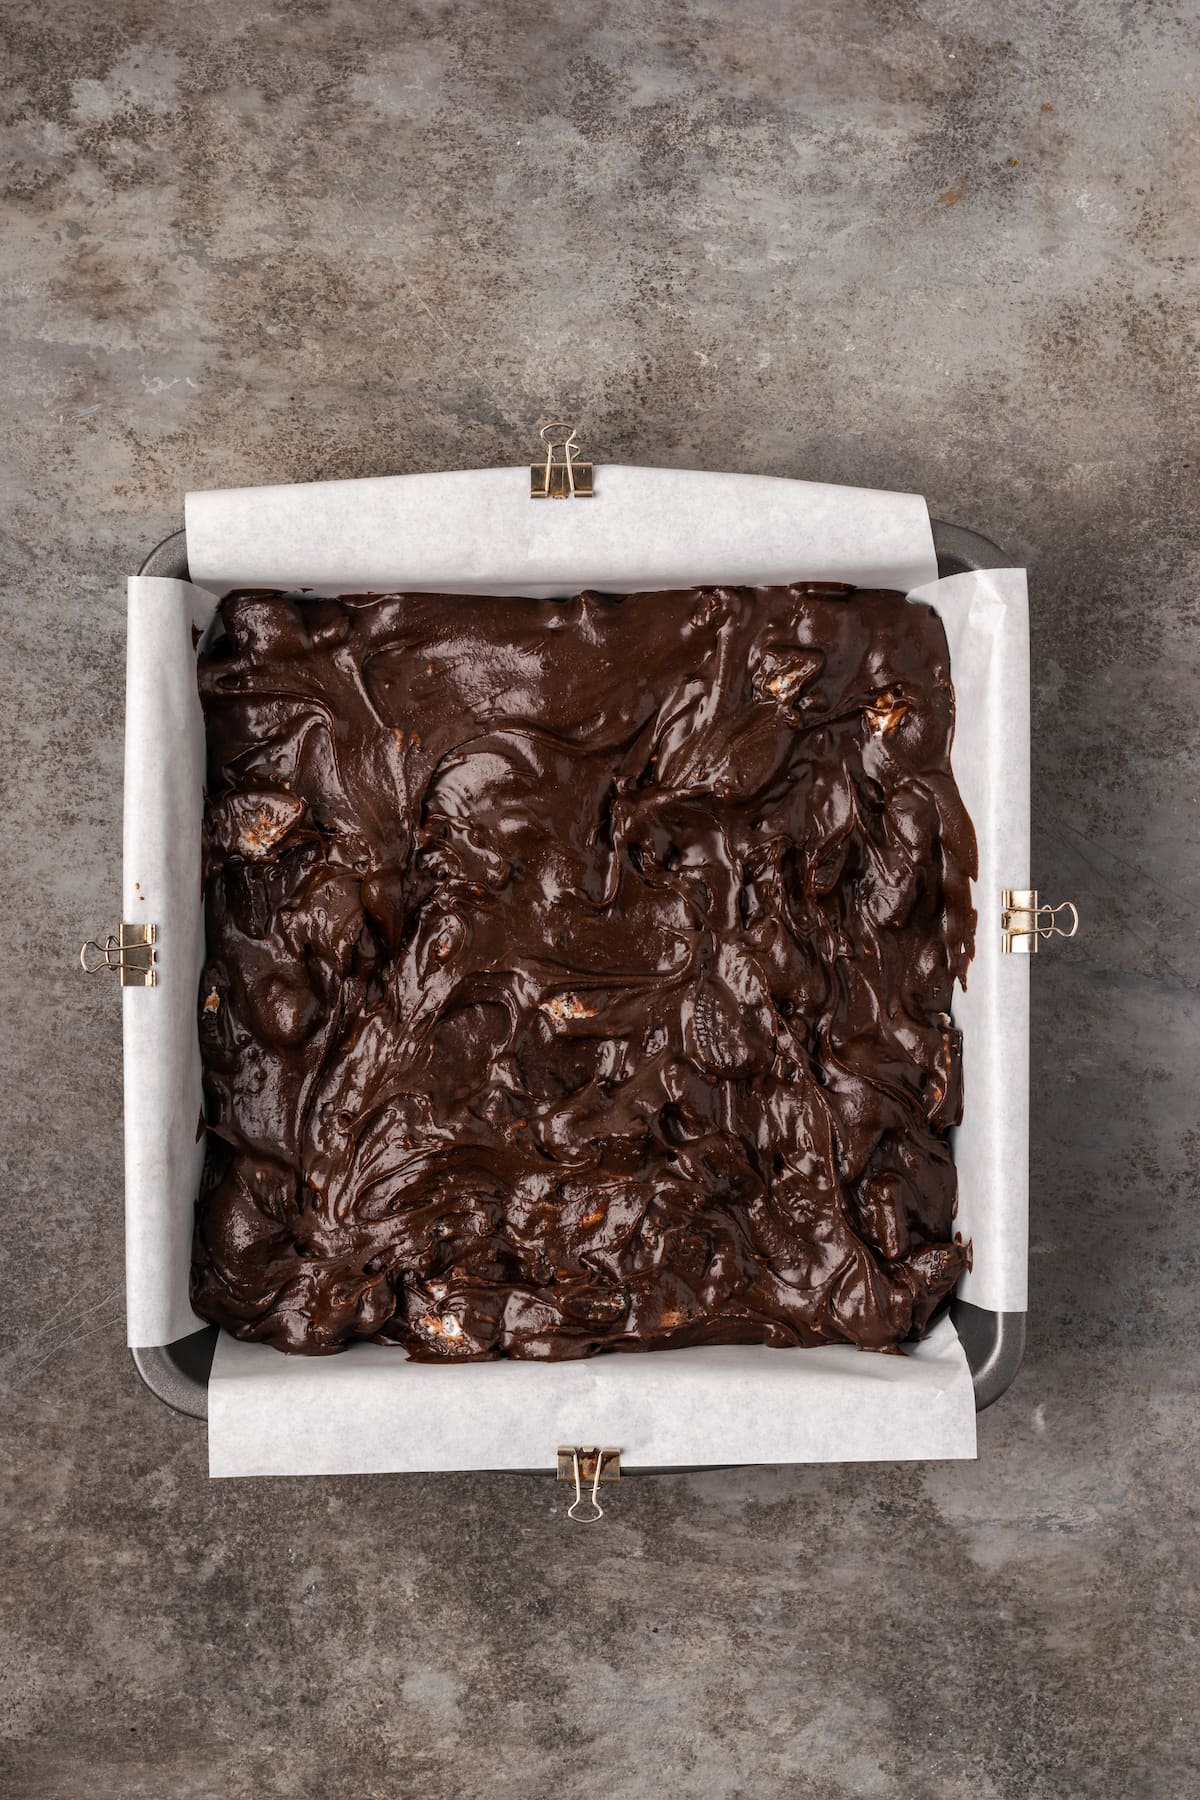 Oreo brownie batter in a square parchment-lined baking pan.